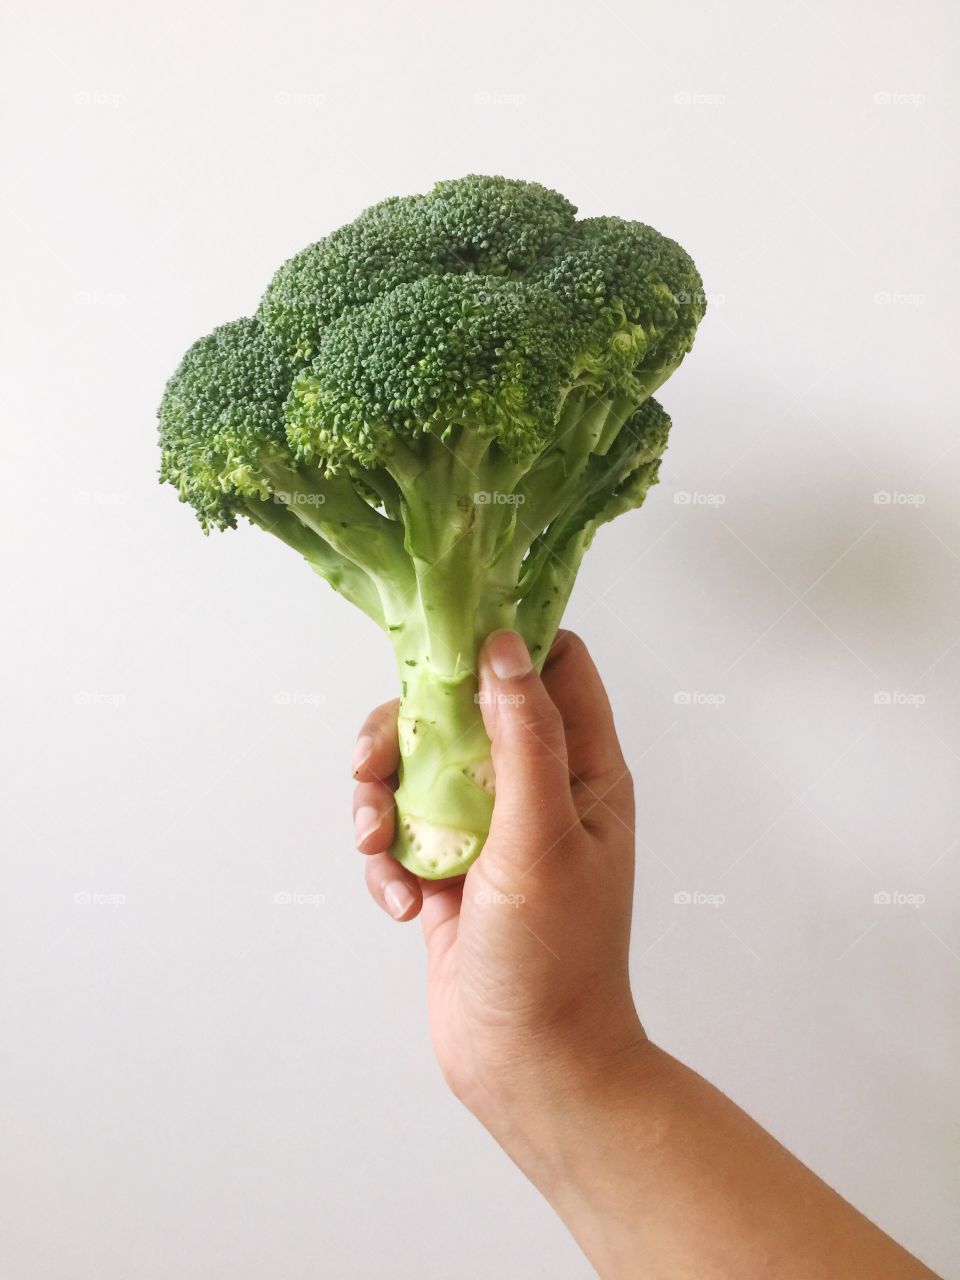 Hand holding a fresh broccoli on white background